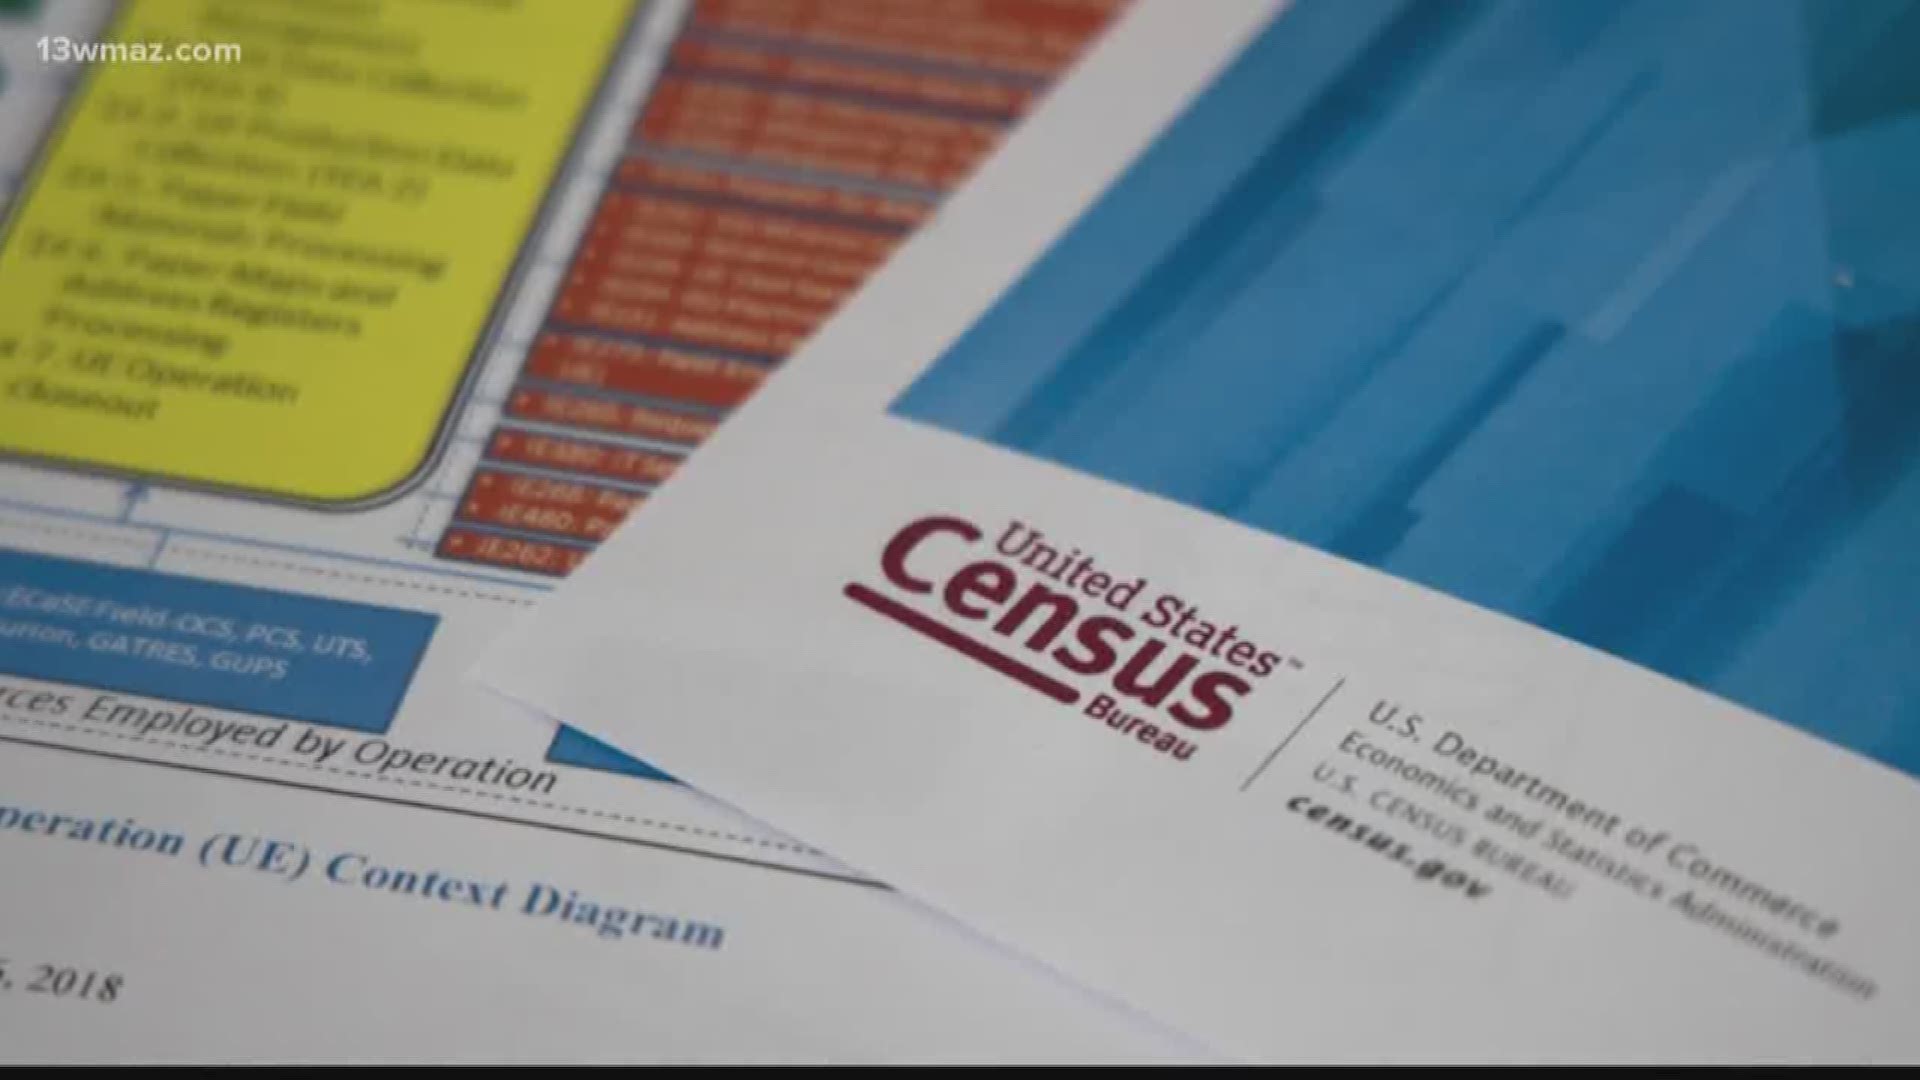 Houston County NAACP president Rutha Jackson said it was the perfect time and place to take the mystery out of the 2020 United States census count.